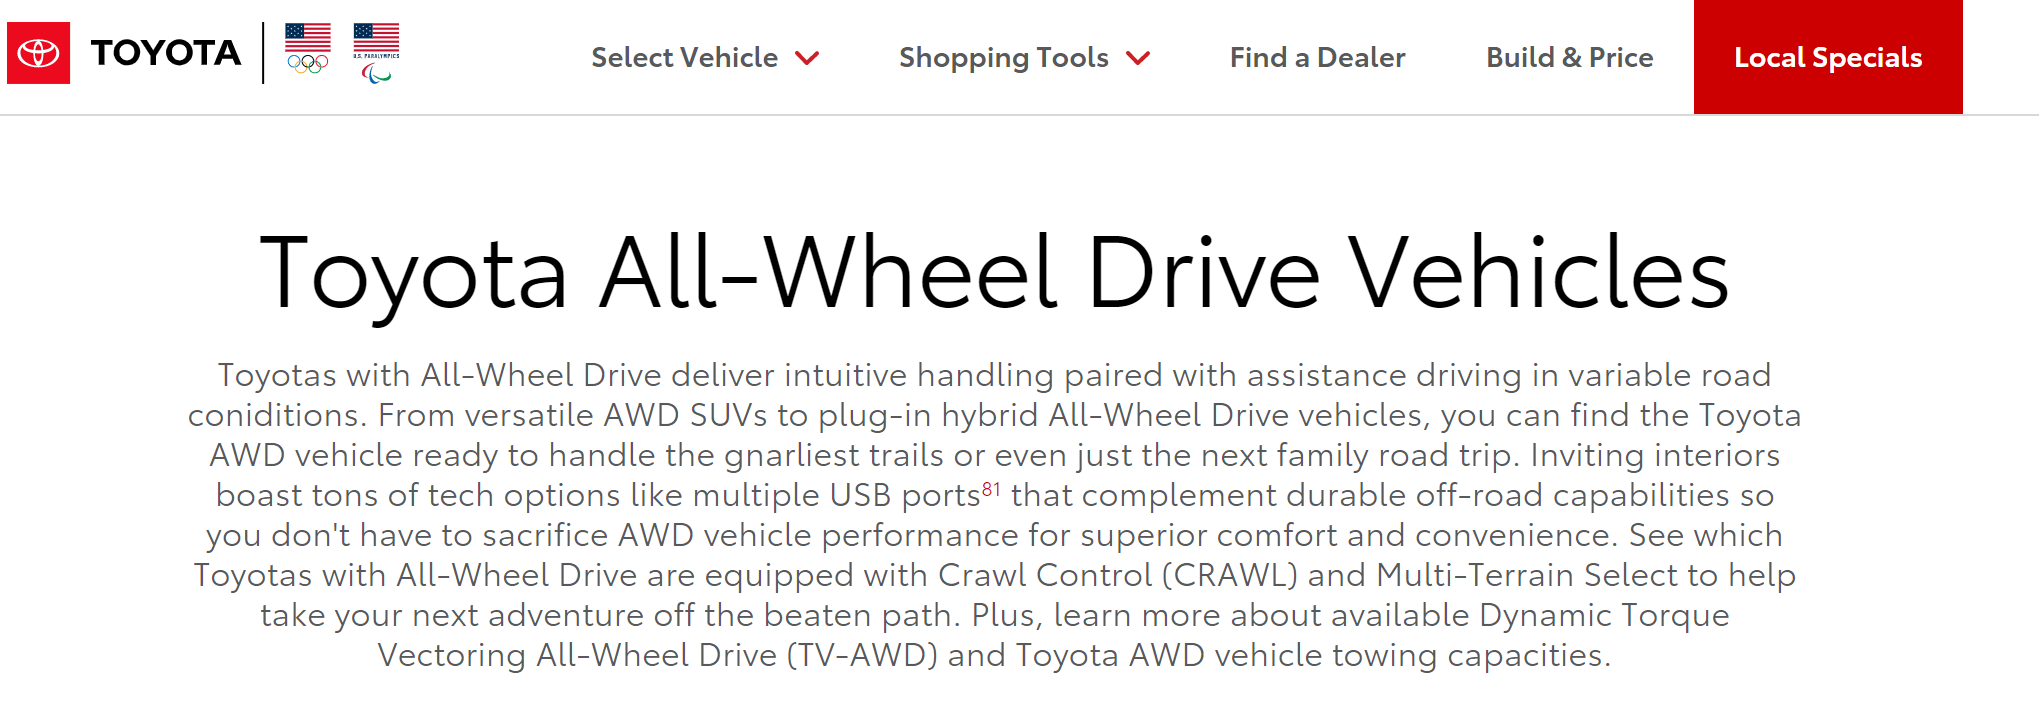 Toyota's all-wheel drive explanation for its vehicles 